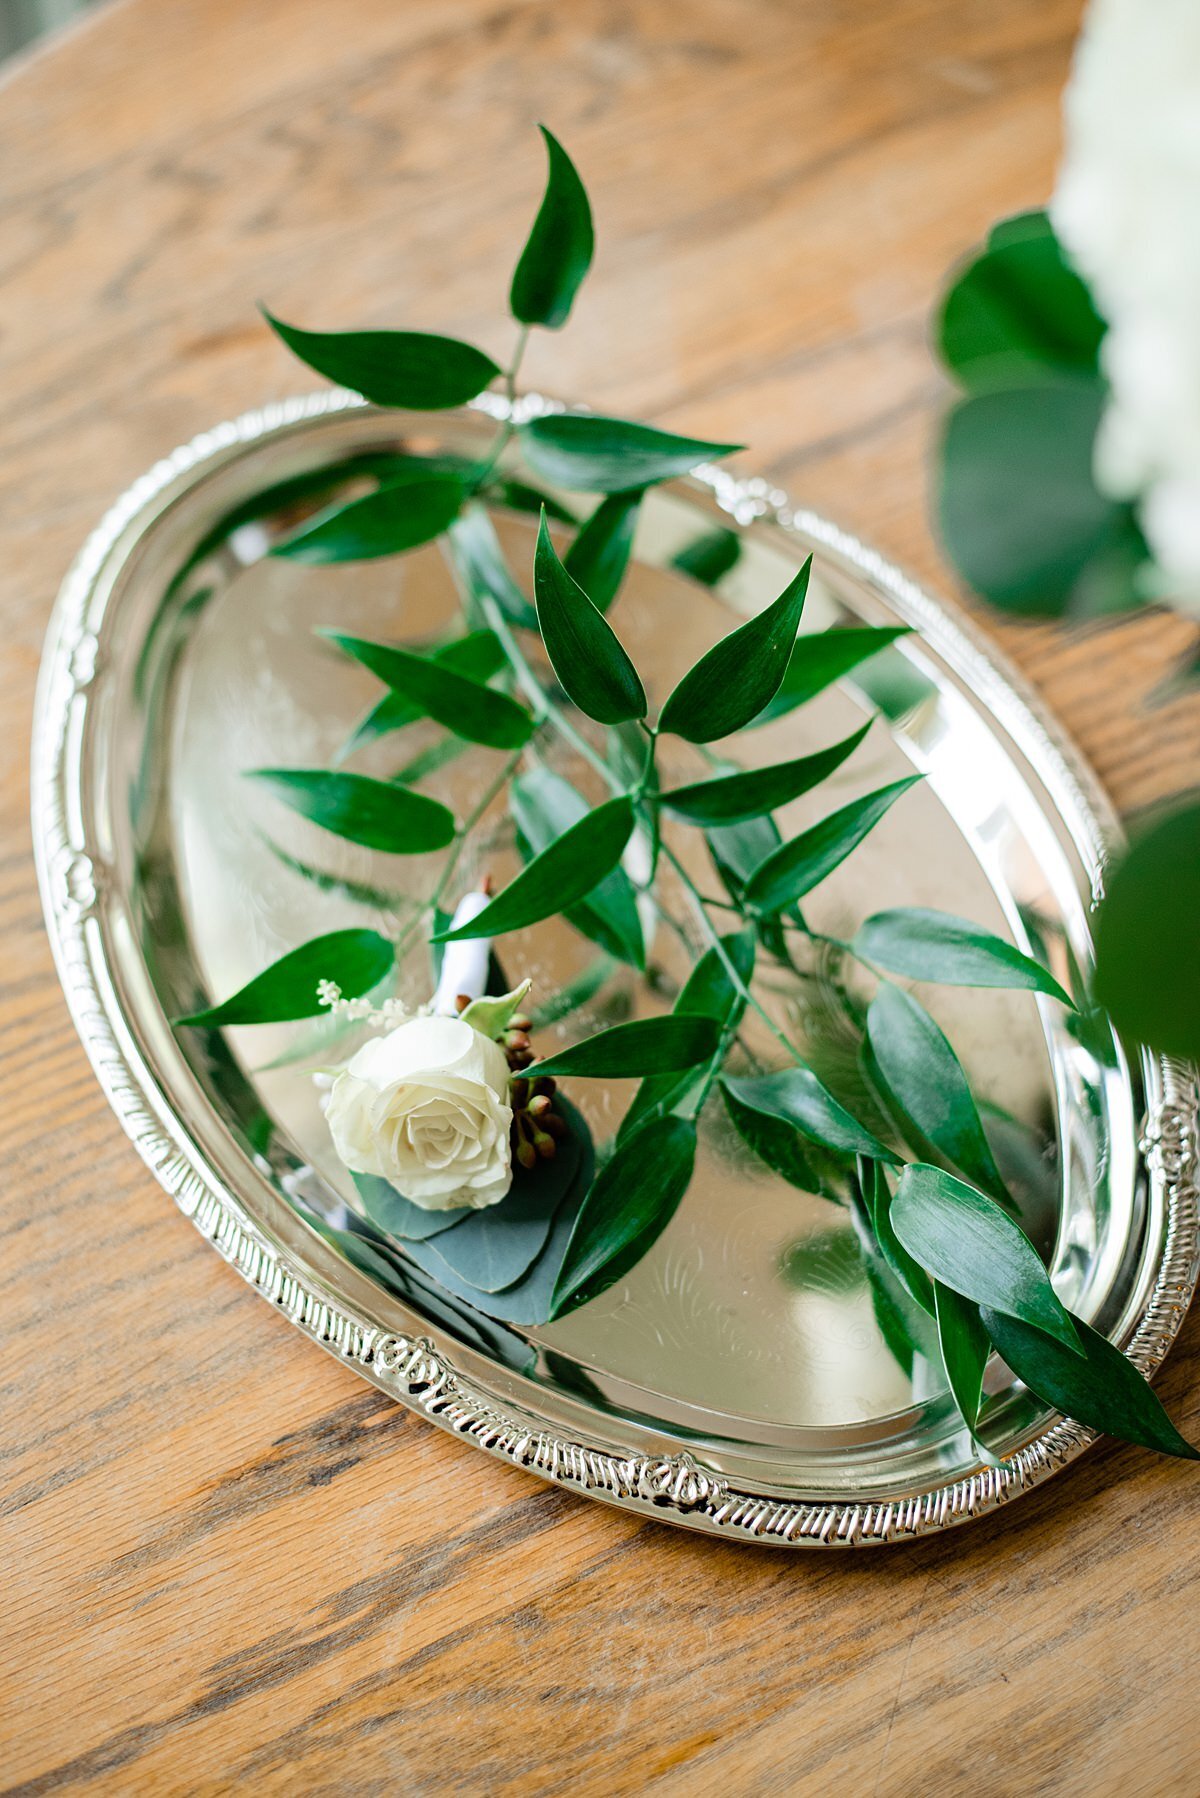 The groom's boutonniere sits on a small sliver tray with accenting greenery. The silver platter is placed on a wooden table.